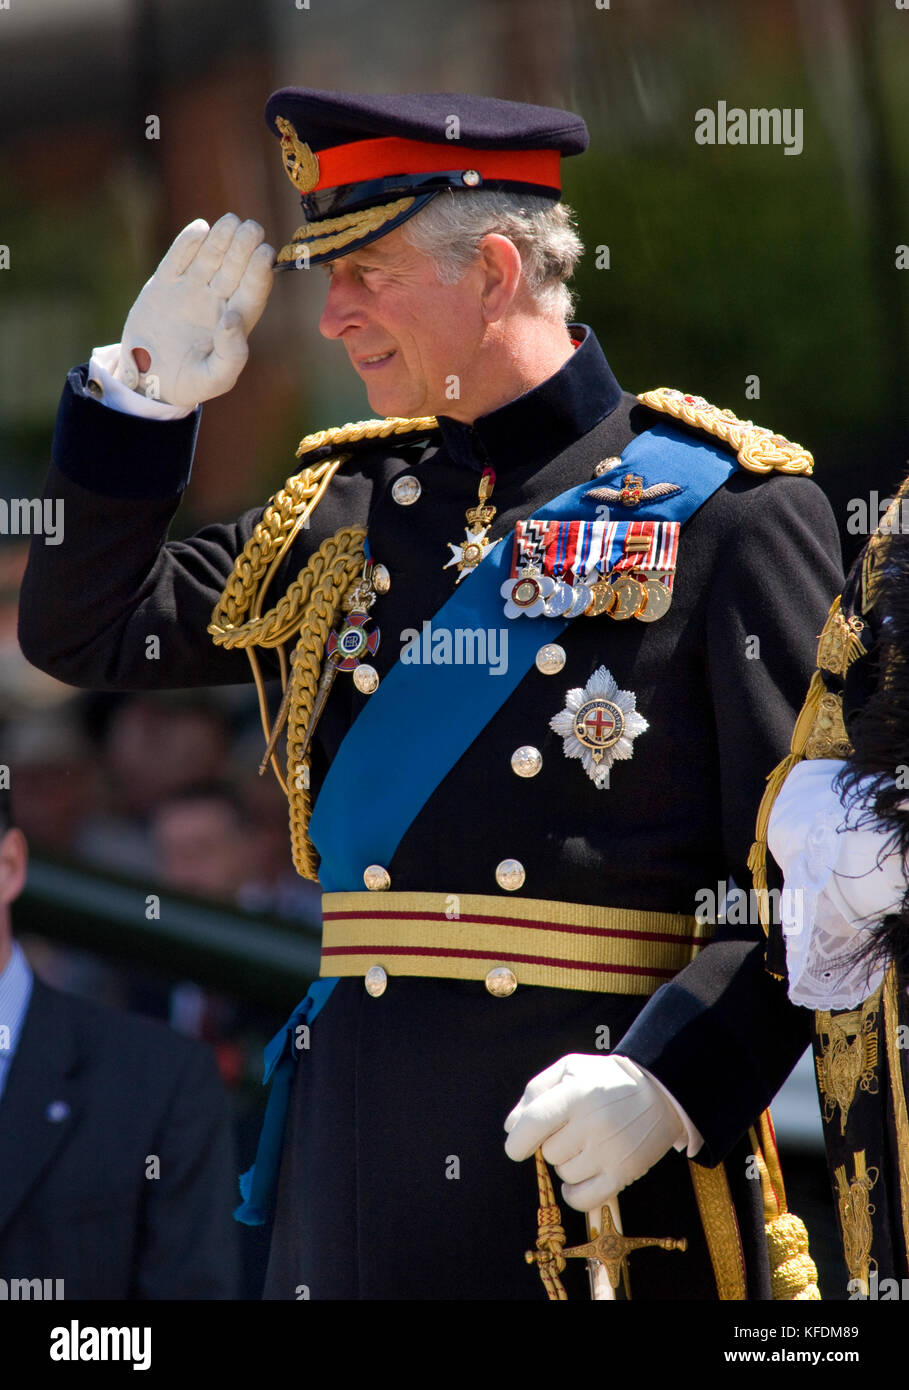 His Royal Highness The Prince of Wales, wearing the full-day ceremonial uniform of a General in the Army, with a General's frock coat. Stock Photo